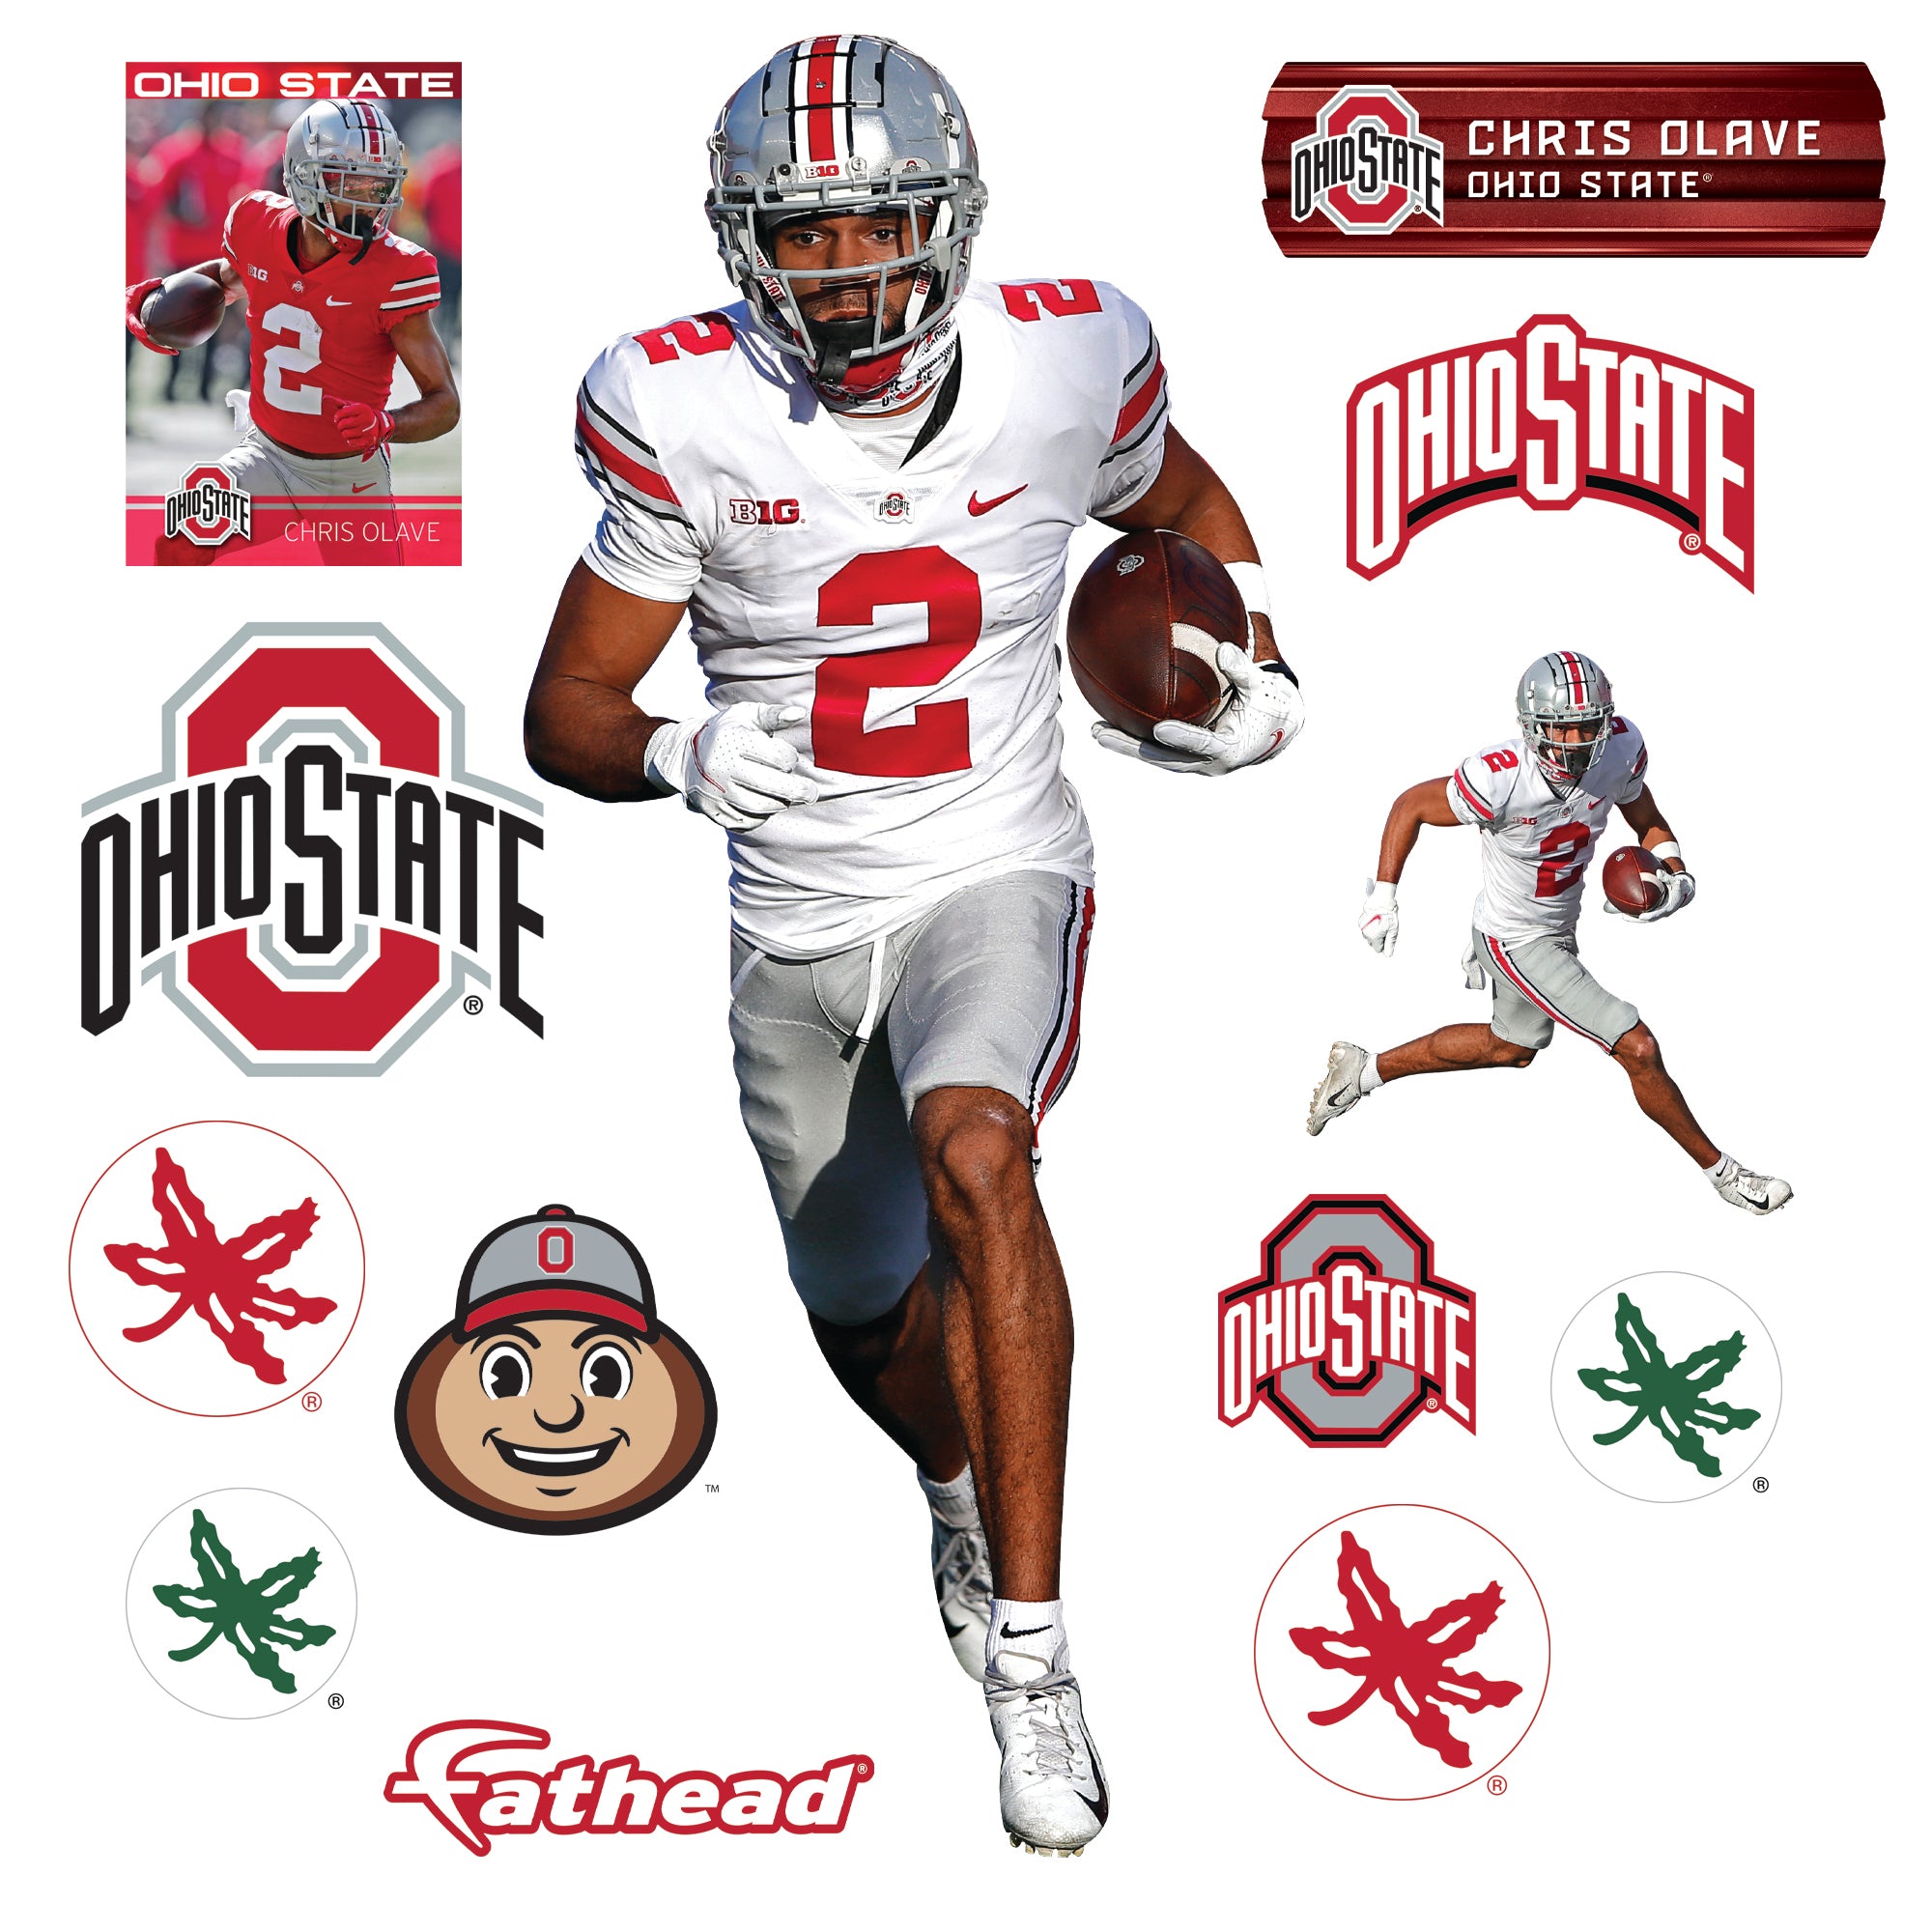 Chris Olave 17 WR Ohio State Wide Receiver in 2023  Ohio state gear  Ohio state football Ohio state